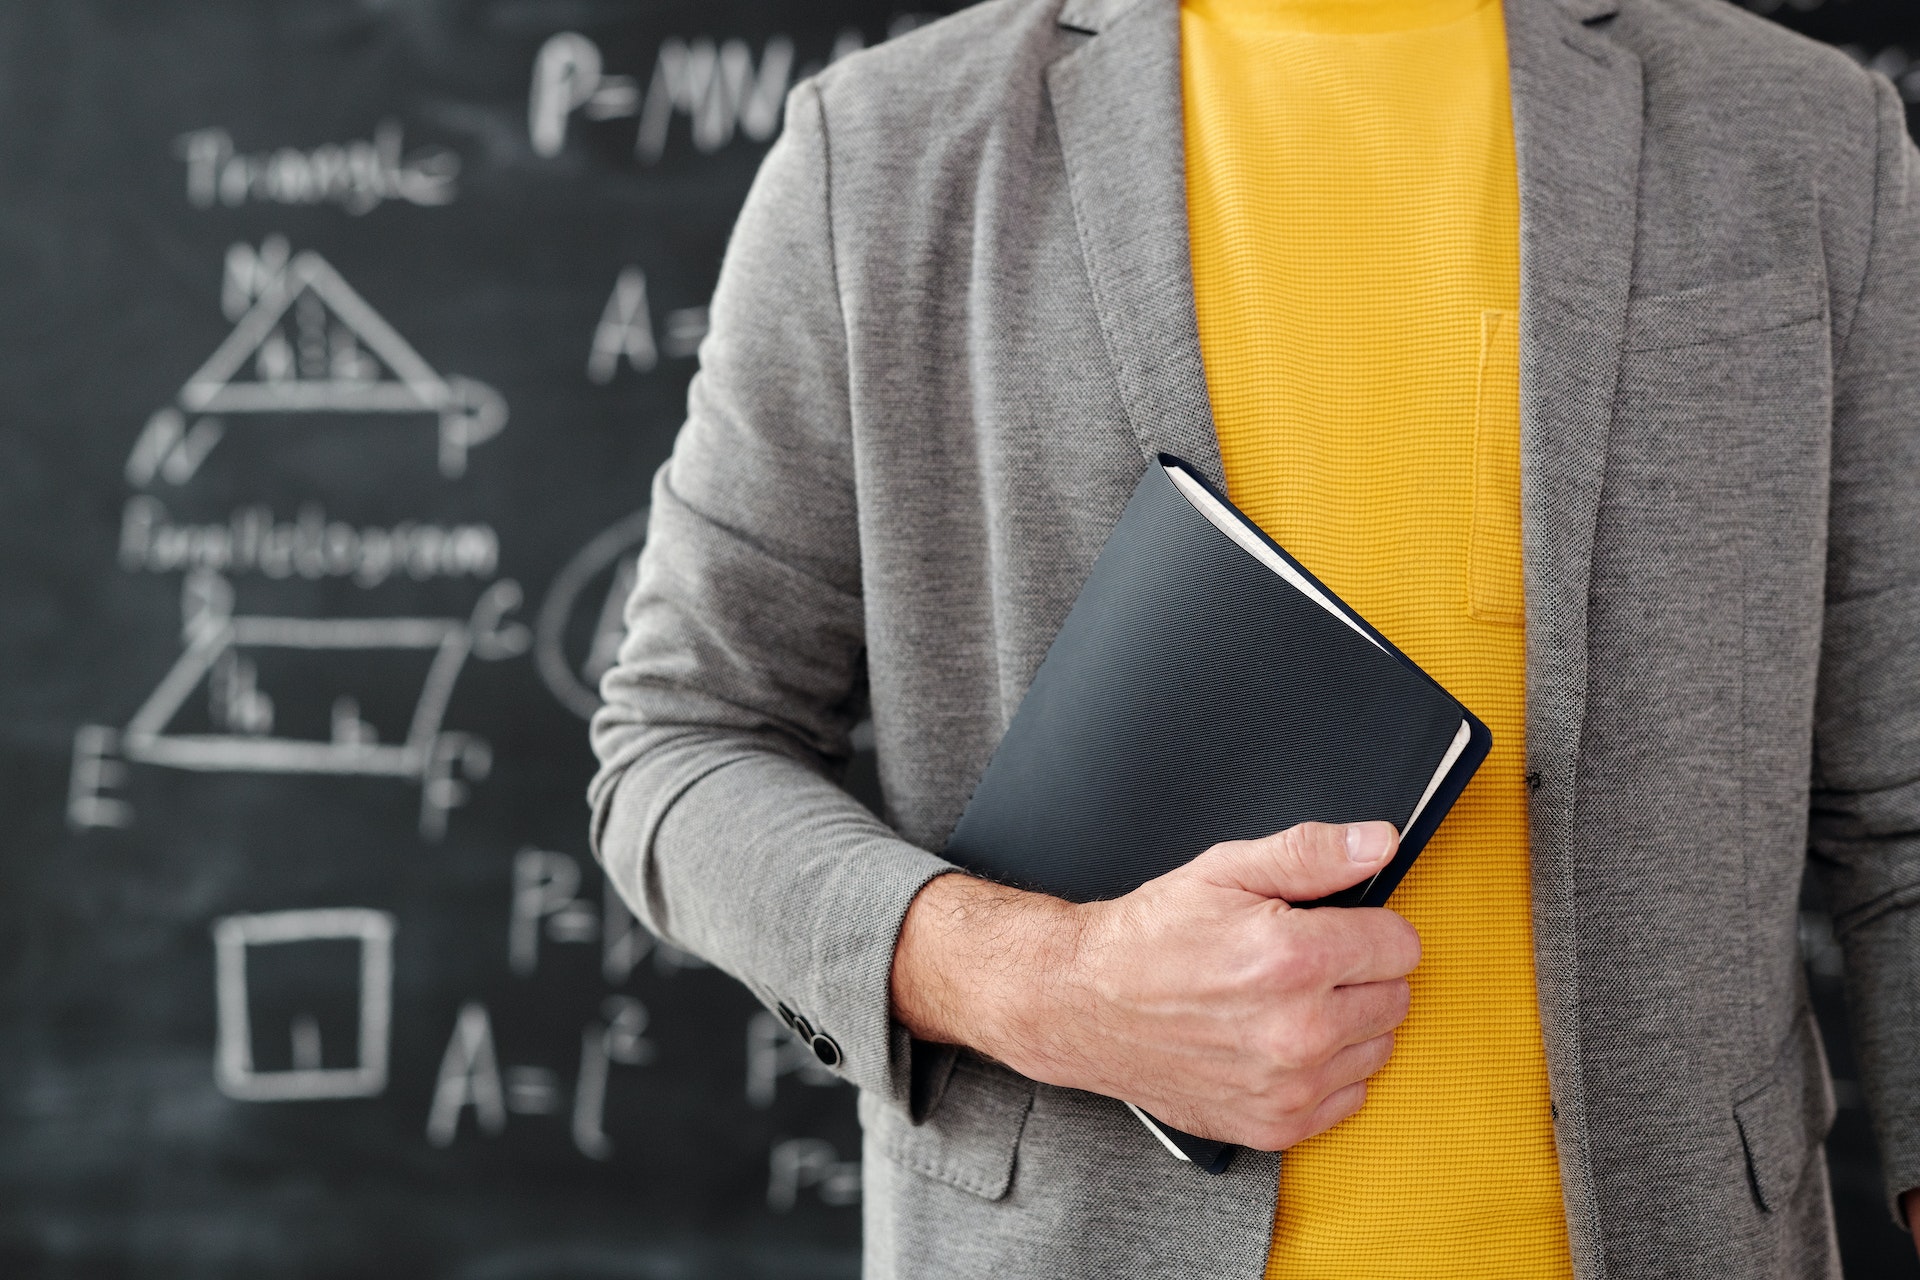 A teacher standing in front of a chalkboard holding a book.